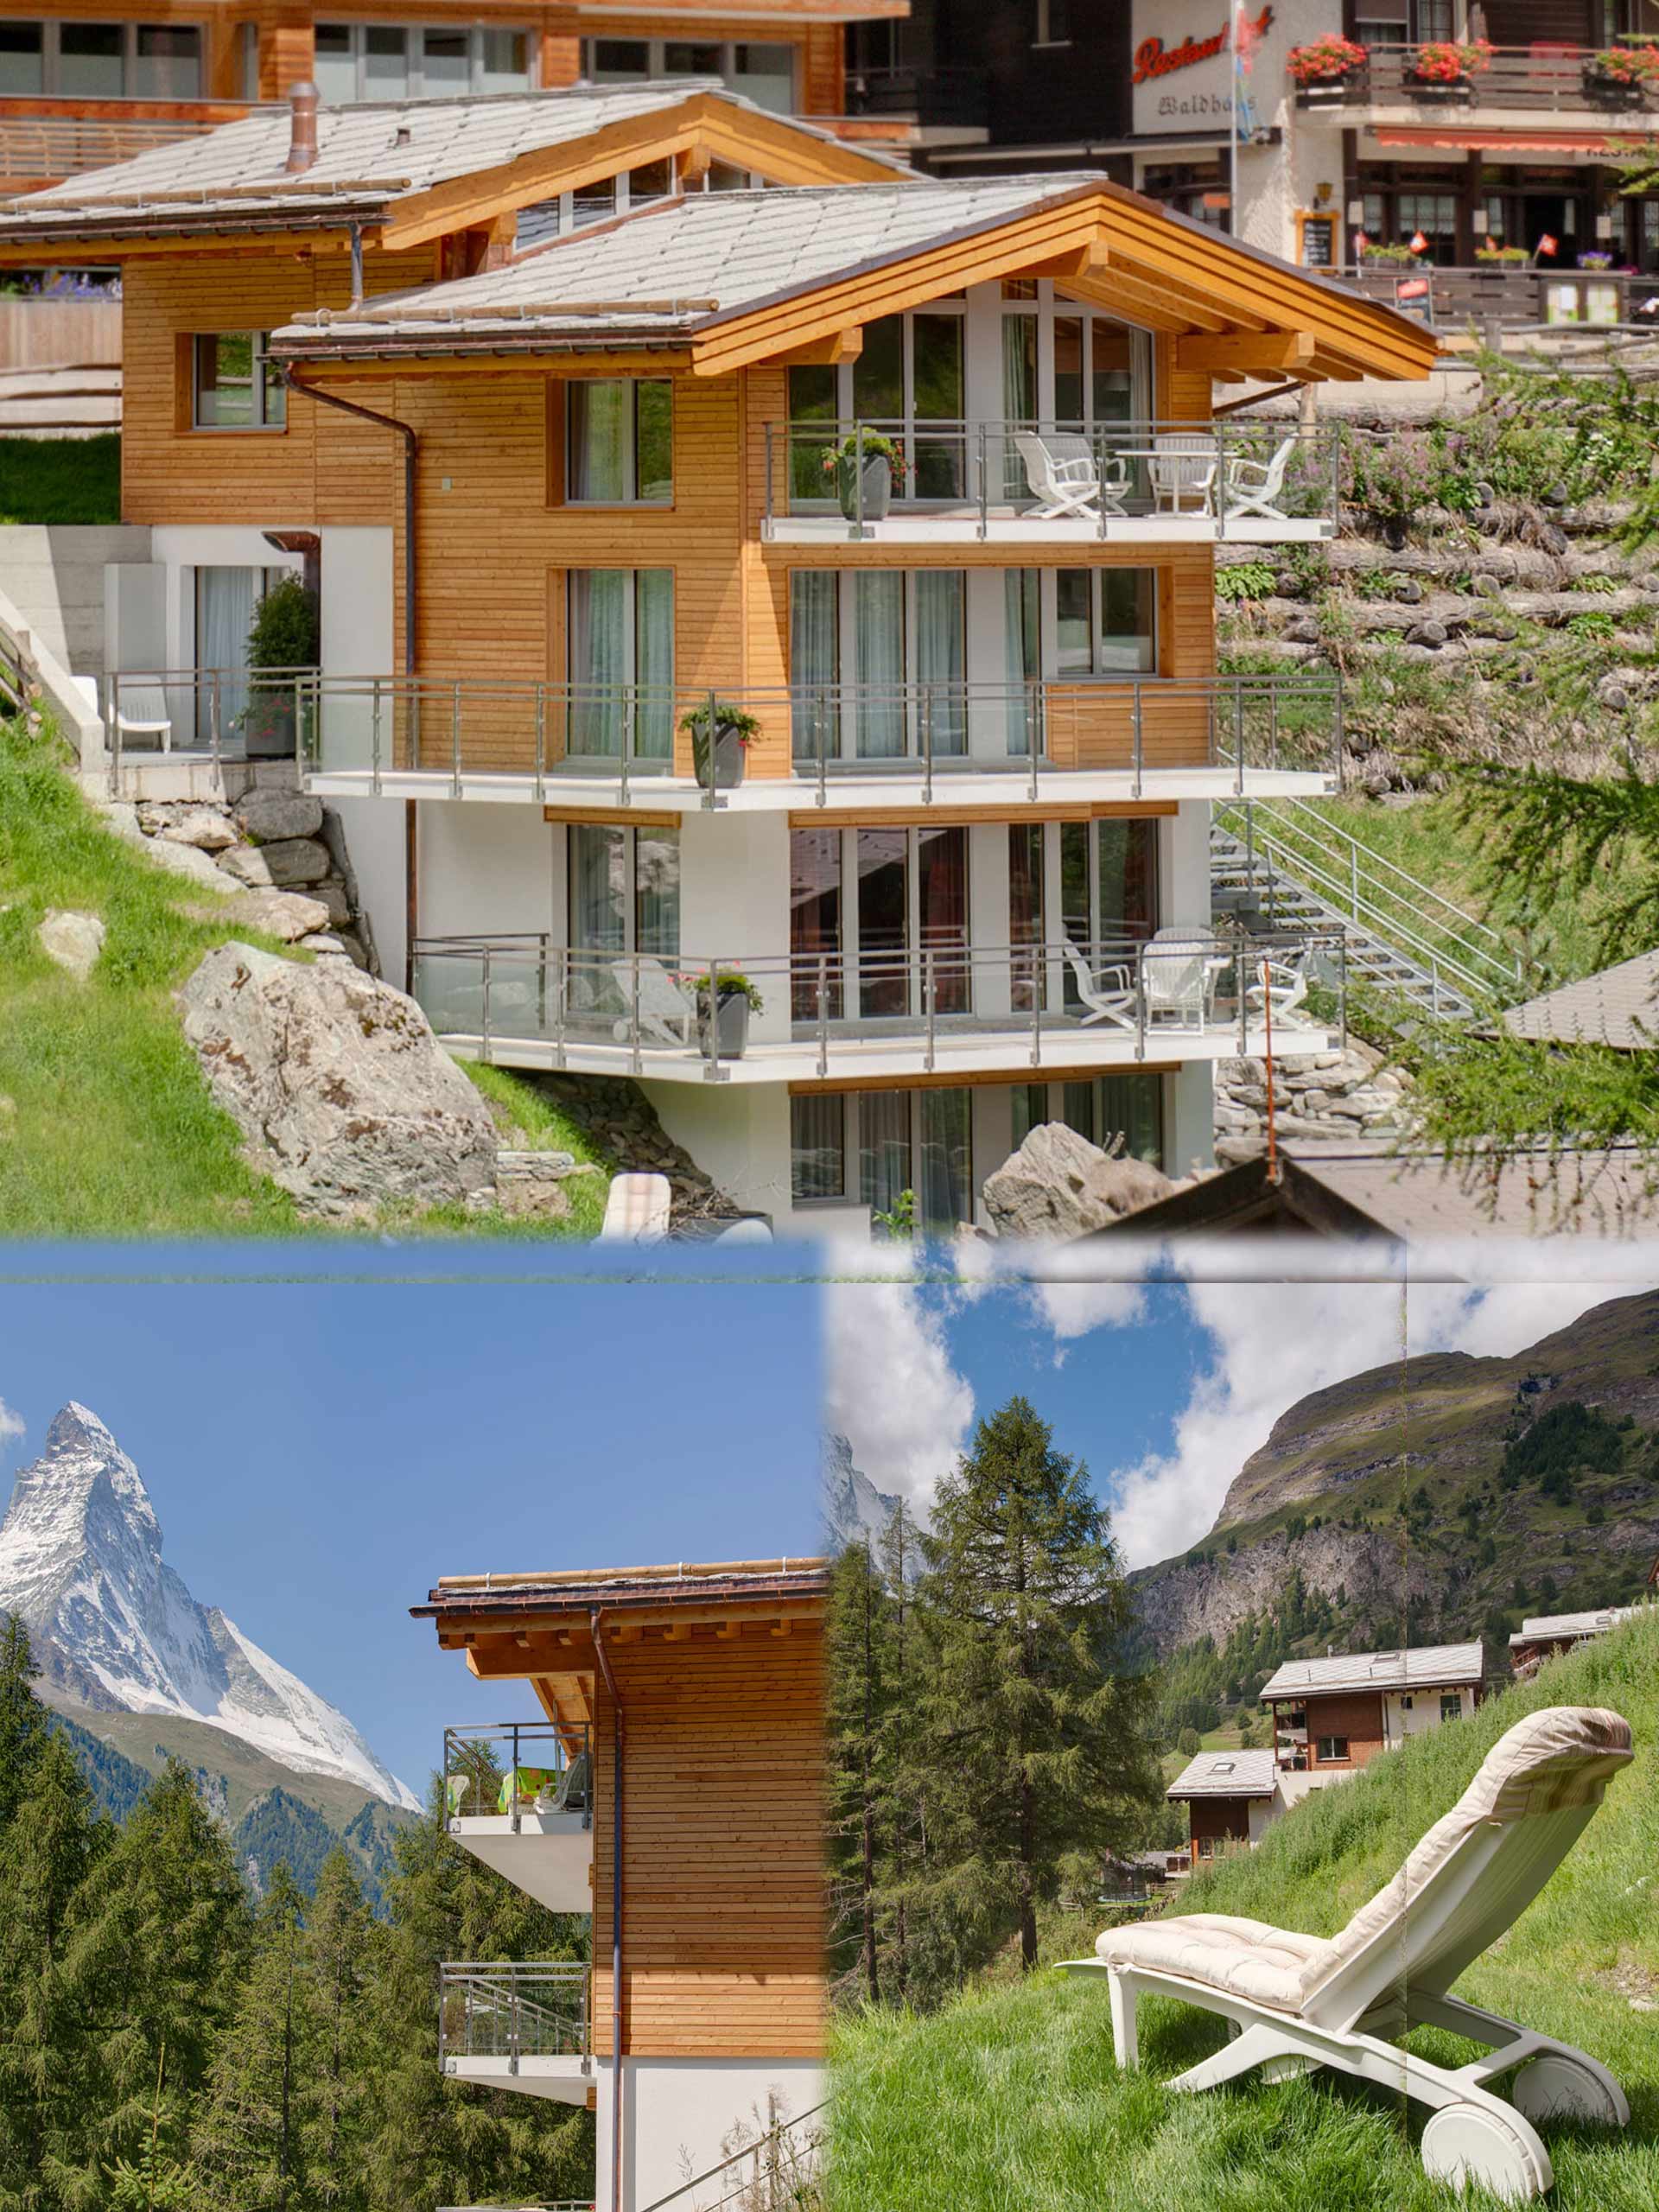 You will find House Gloria in Winkelmatten. Winkelmatten is surrounded by flowery meadows at 1700 m altitude and is a district of Zermatt, built on the sunny side of the slope to the south of the village.